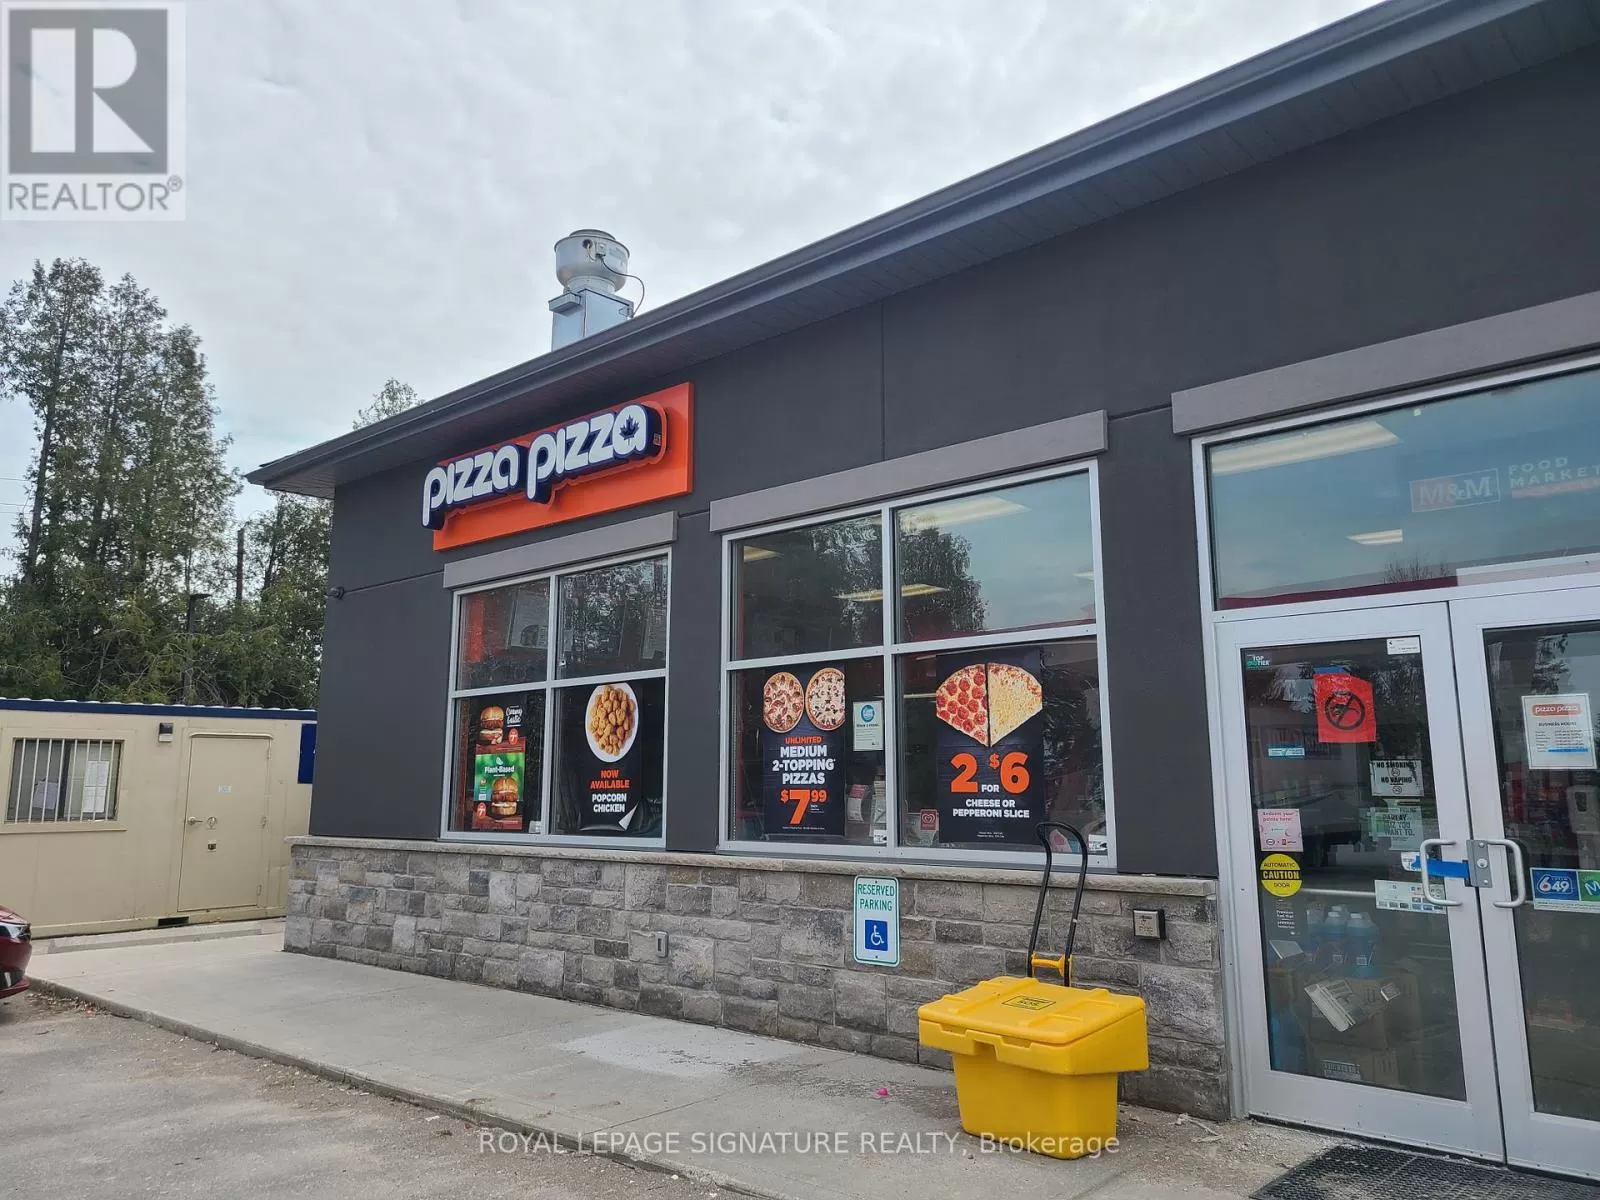 752 Queen St E, St. Marys, Ontario N4X 1G2